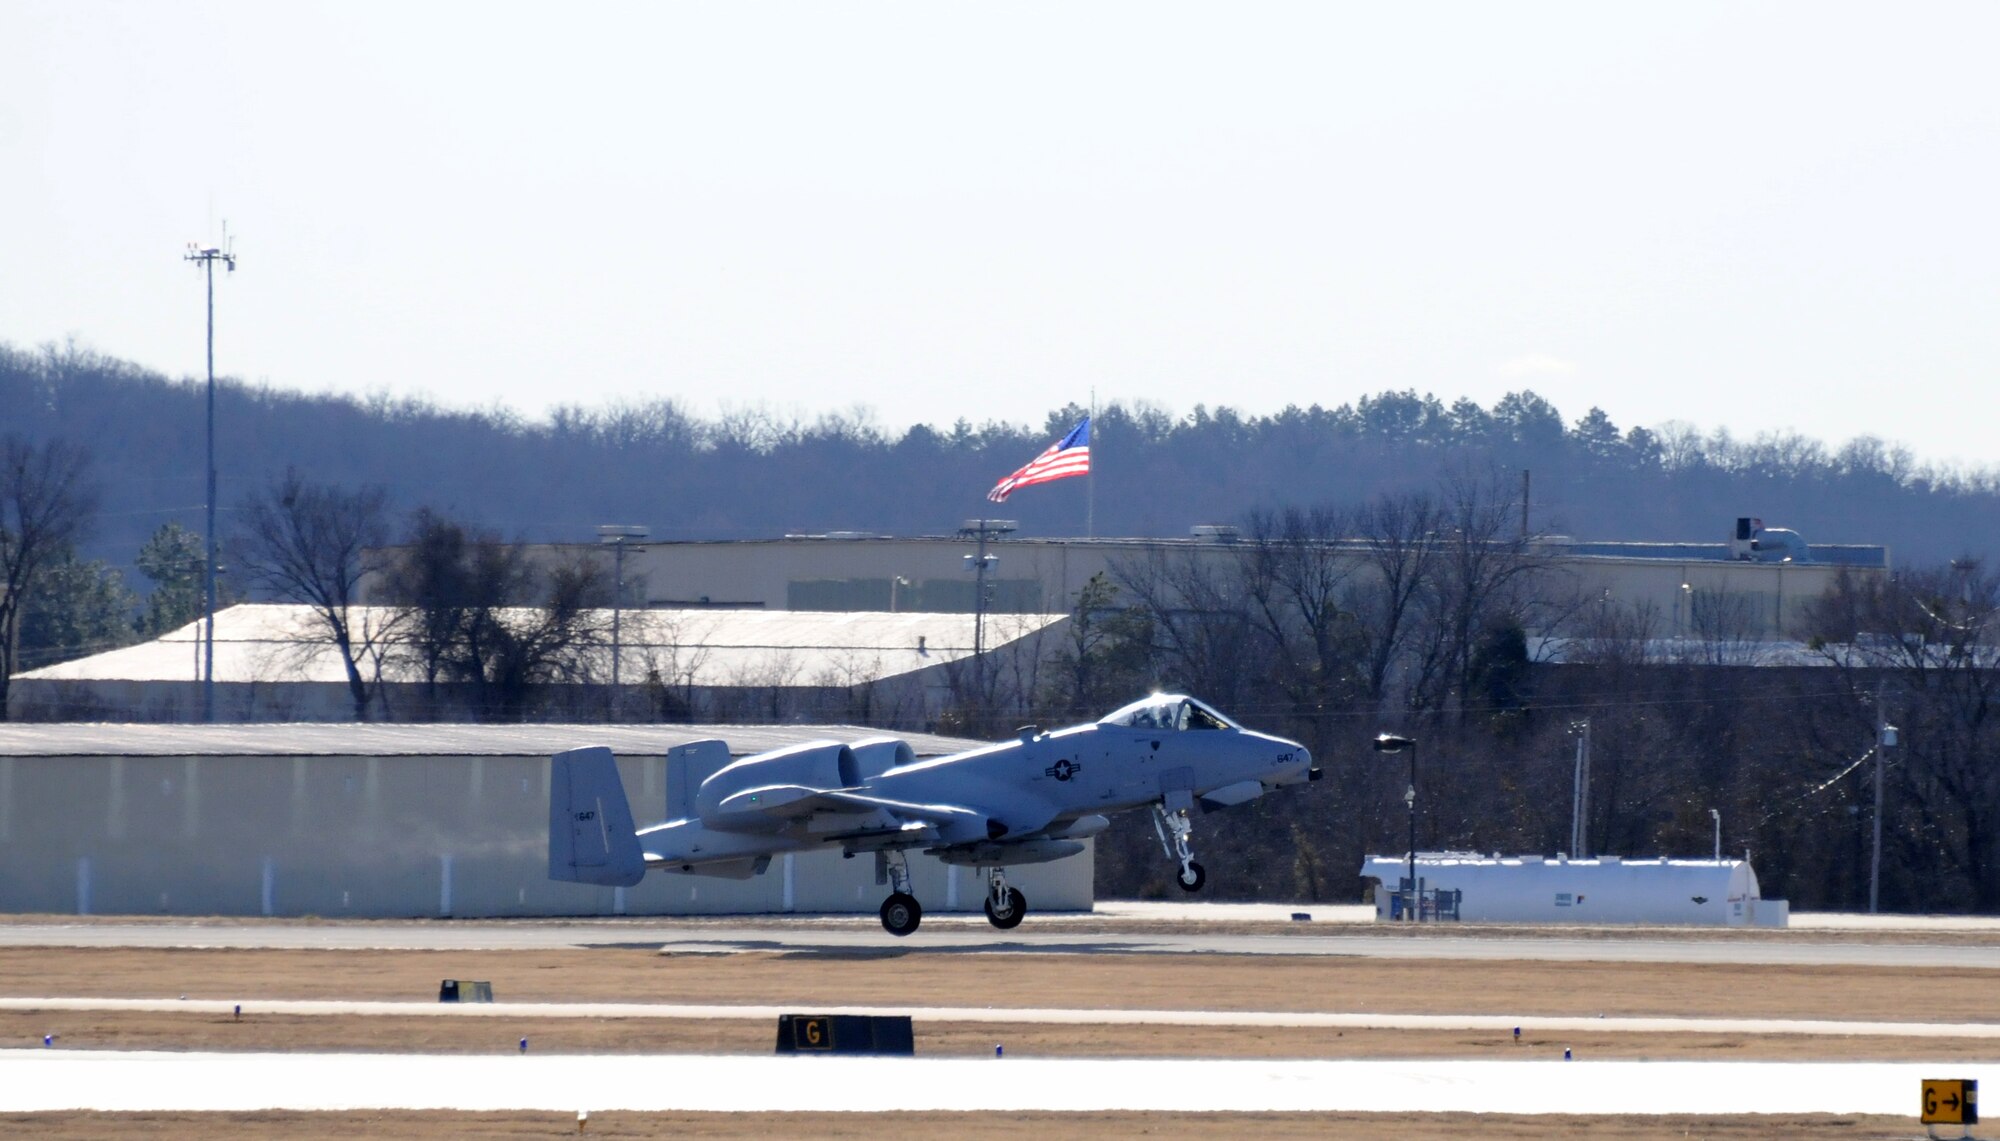 An A-10C Thunderbolt II "Warthog" (Tail No. 0647) departs the 188th Fighter Wing for Moody Air Force Base, Ga., Jan. 15, 2014. Tail Nos. 0129 and 0647 were transferred from the 188th’s Ebbing Air National Guard Base, Fort Smith, Ark., as part of the wing’s on-going conversion from a fighter mission to remotely piloted aircraft and Intelligence mission, which will include a space-focused targeting squadron. The 188th now has nine remaining A-10s left on station. The A-10s will join Moody AFB’s 75th Fighter Squadron. (U.S. Air National Guard photo by Tech Sgt. Josh Lewis/188th Fighter Wing Public Affairs)